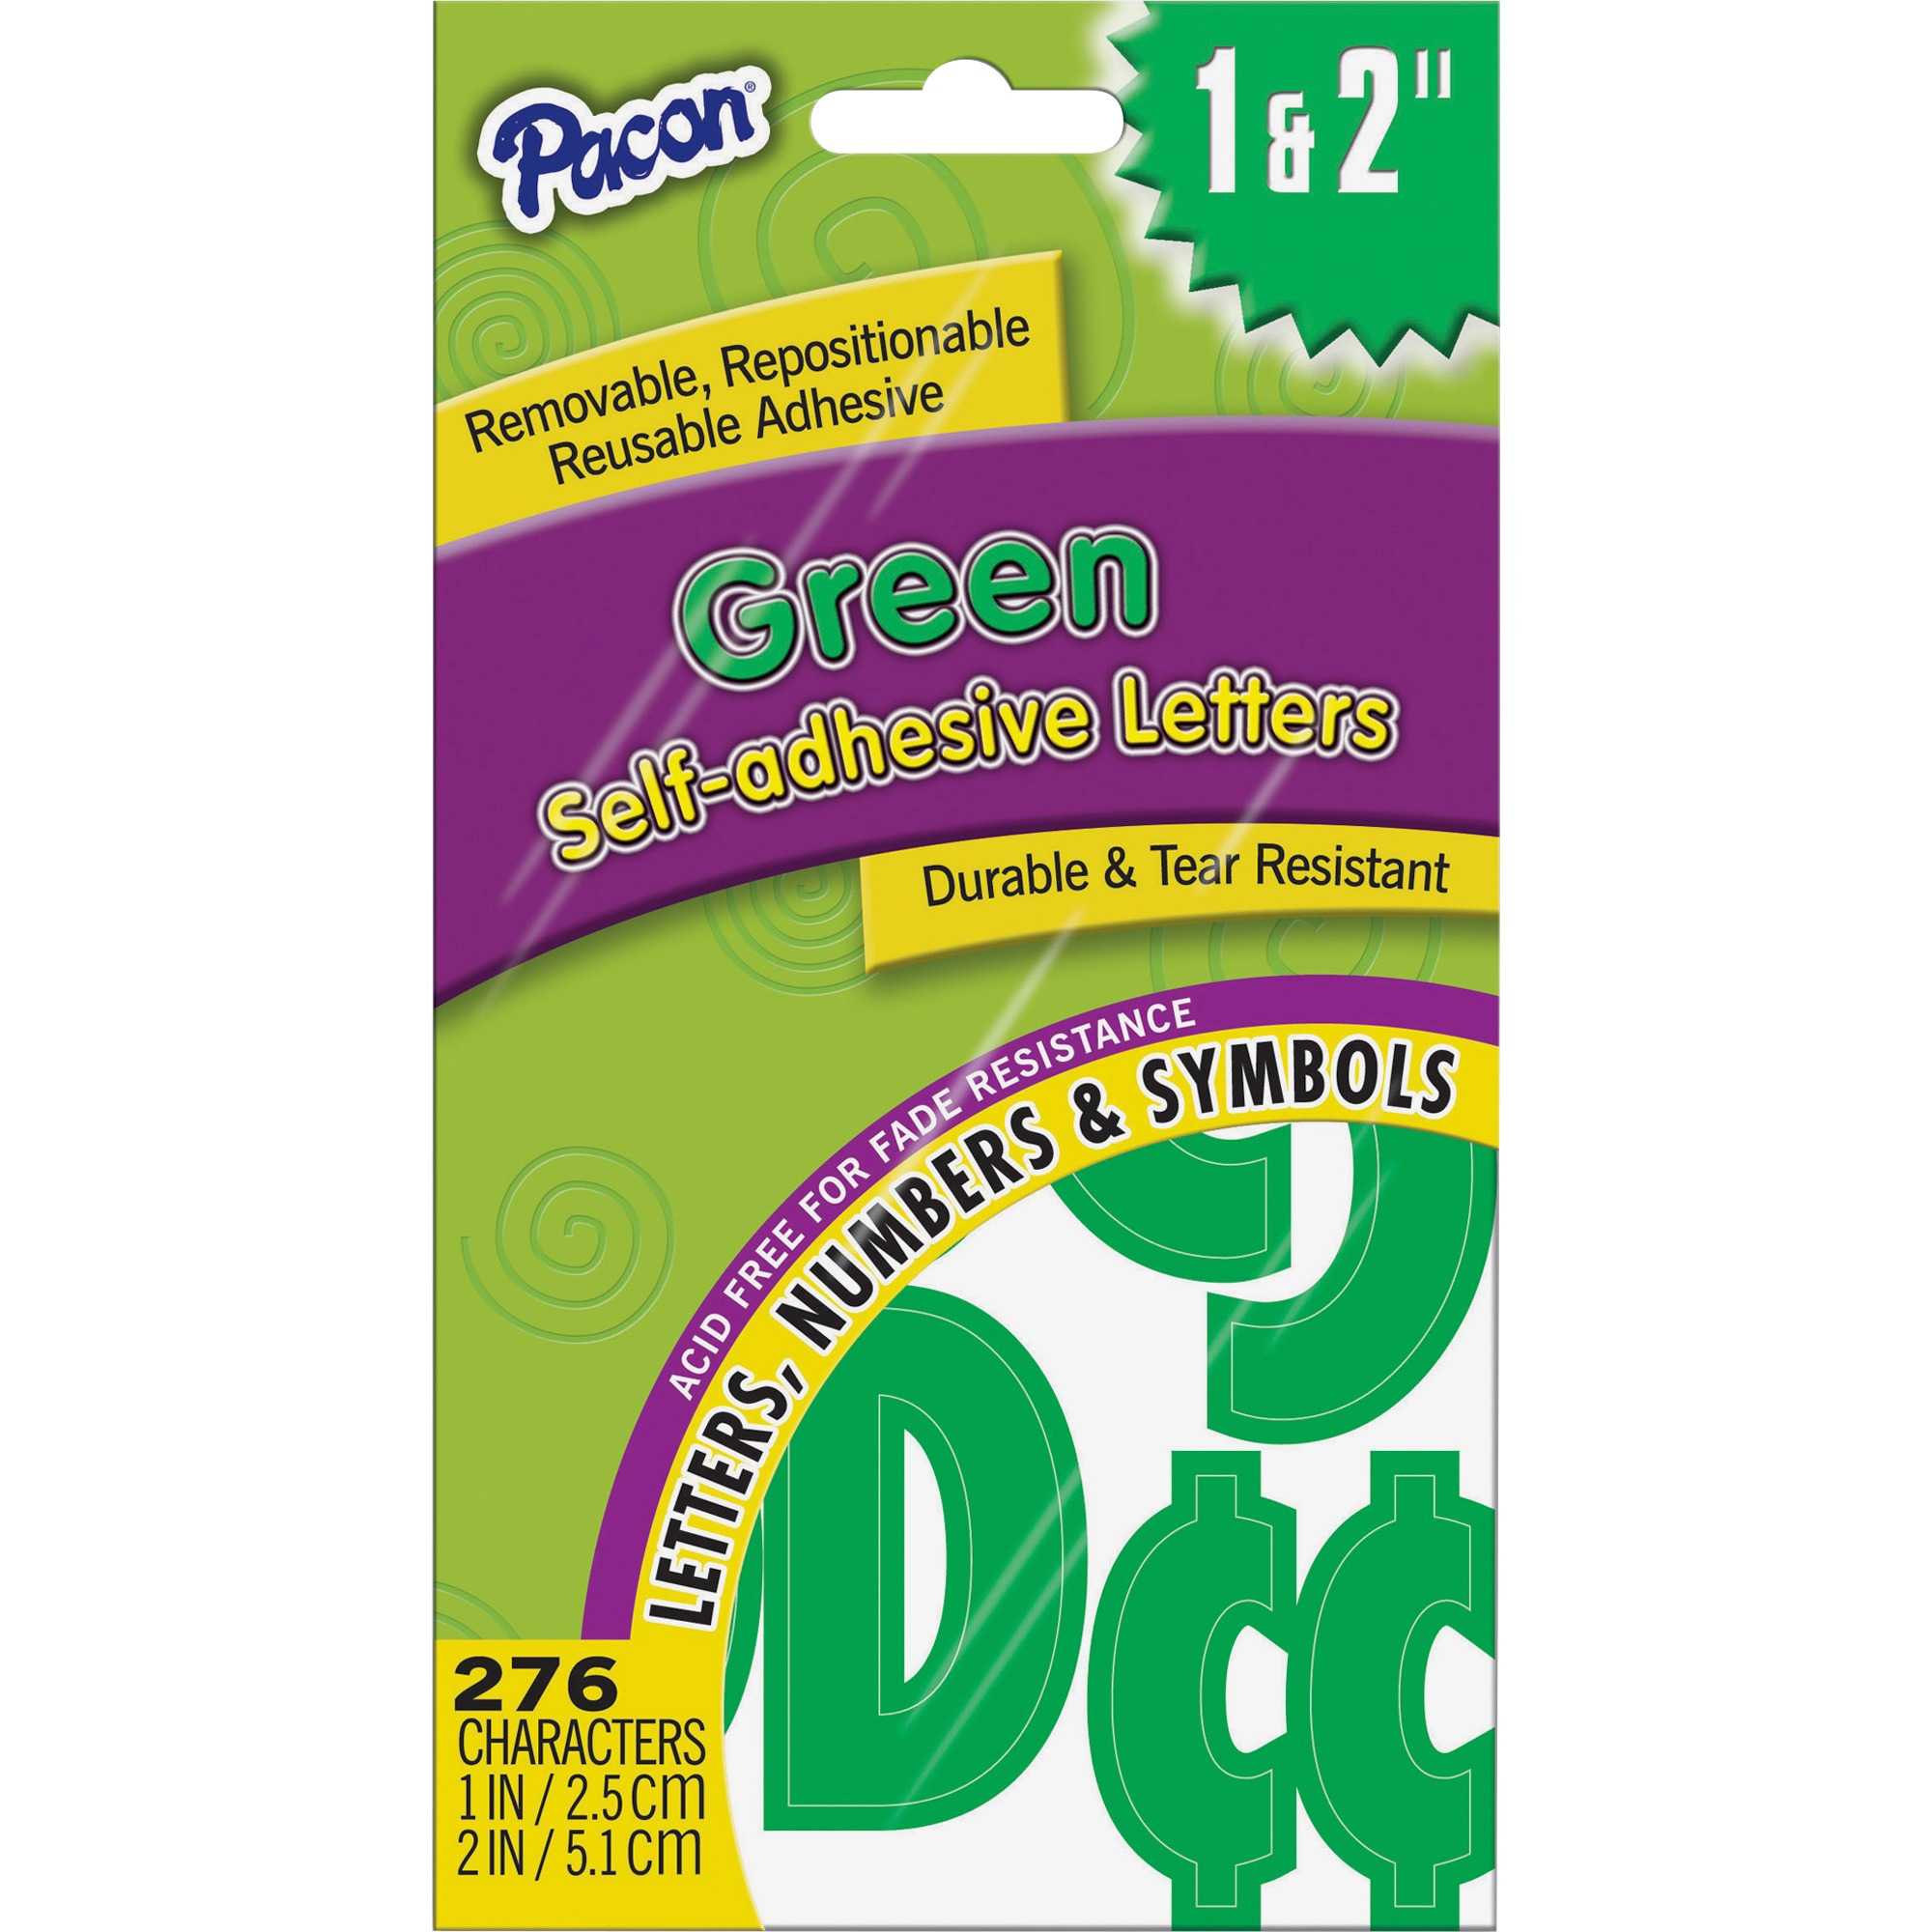 Pacon Reusable Self-adhesive Letters - Uppercase Letters, Punctuation Marks, Number - Green (pac-51661)